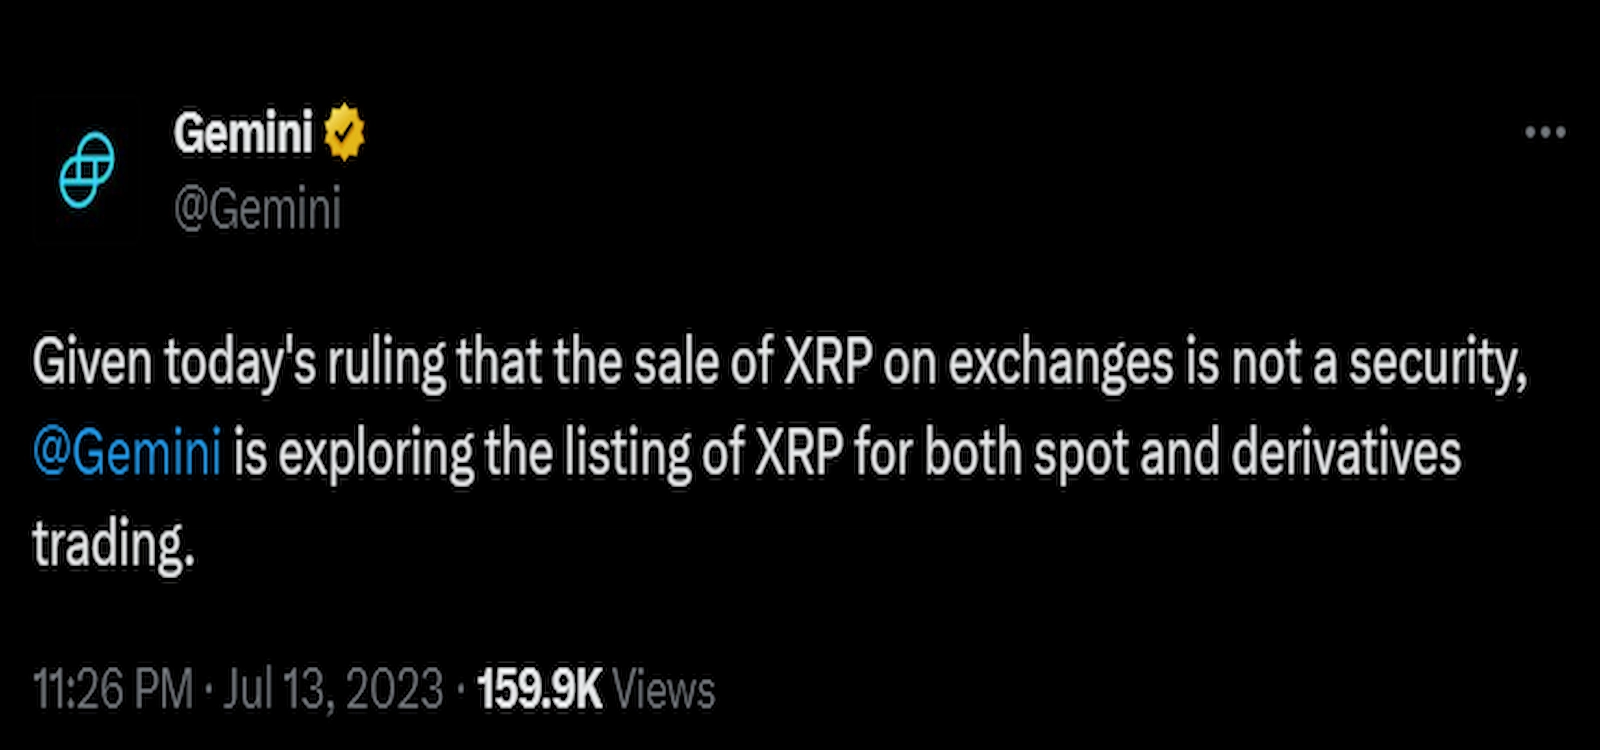 Gemini stated that it was exploring relisting XRP token.